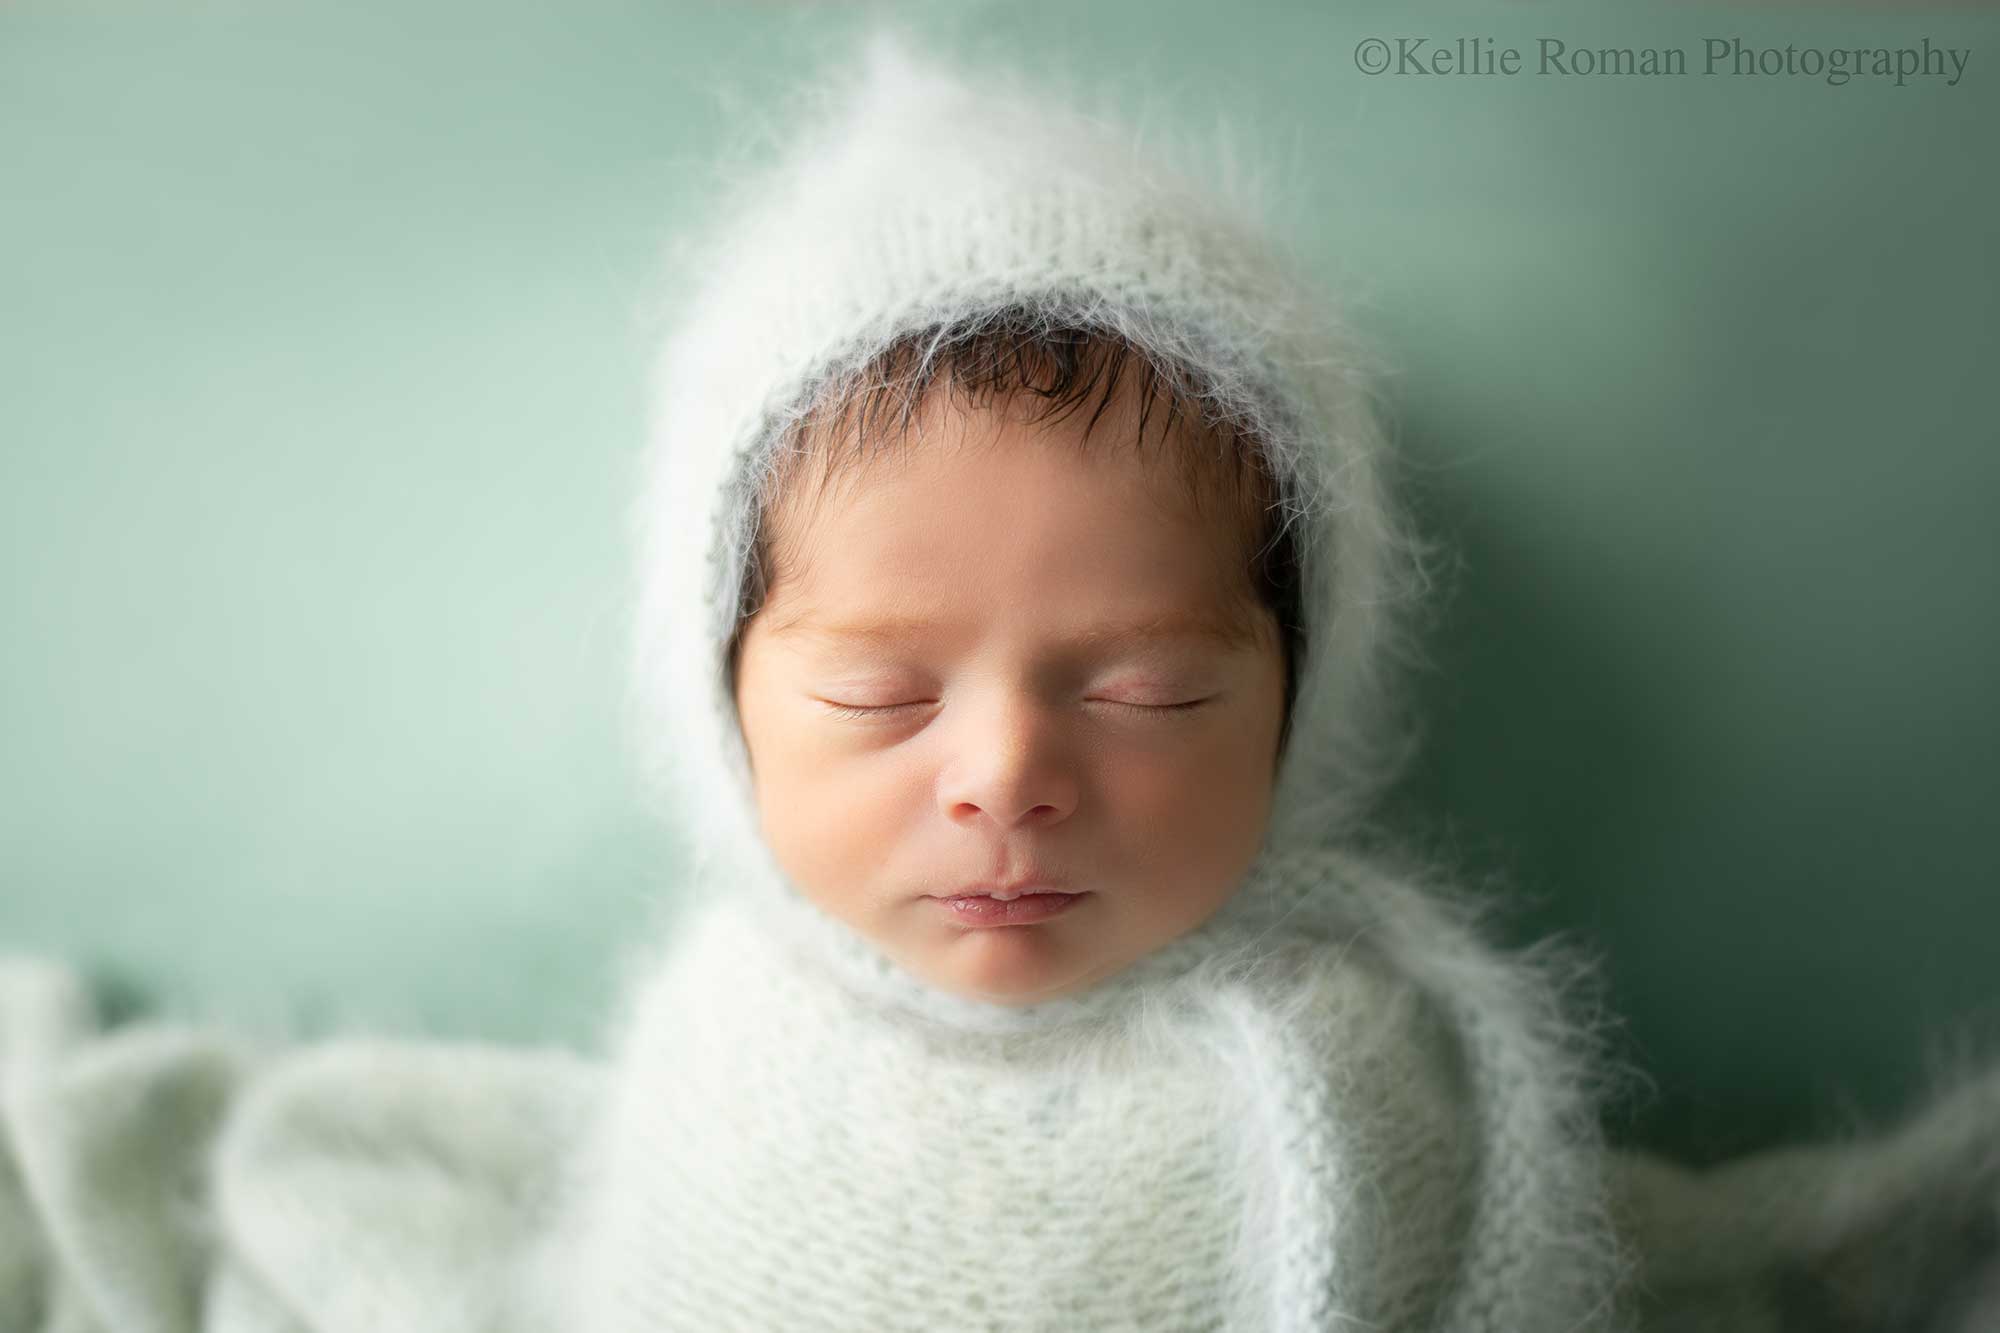 newborn photography milwaukee. a newborn baby boy is asleep on his back on top of teal fabric. he has a fuzzy light teal bonnet on with a matching swaddle over him.